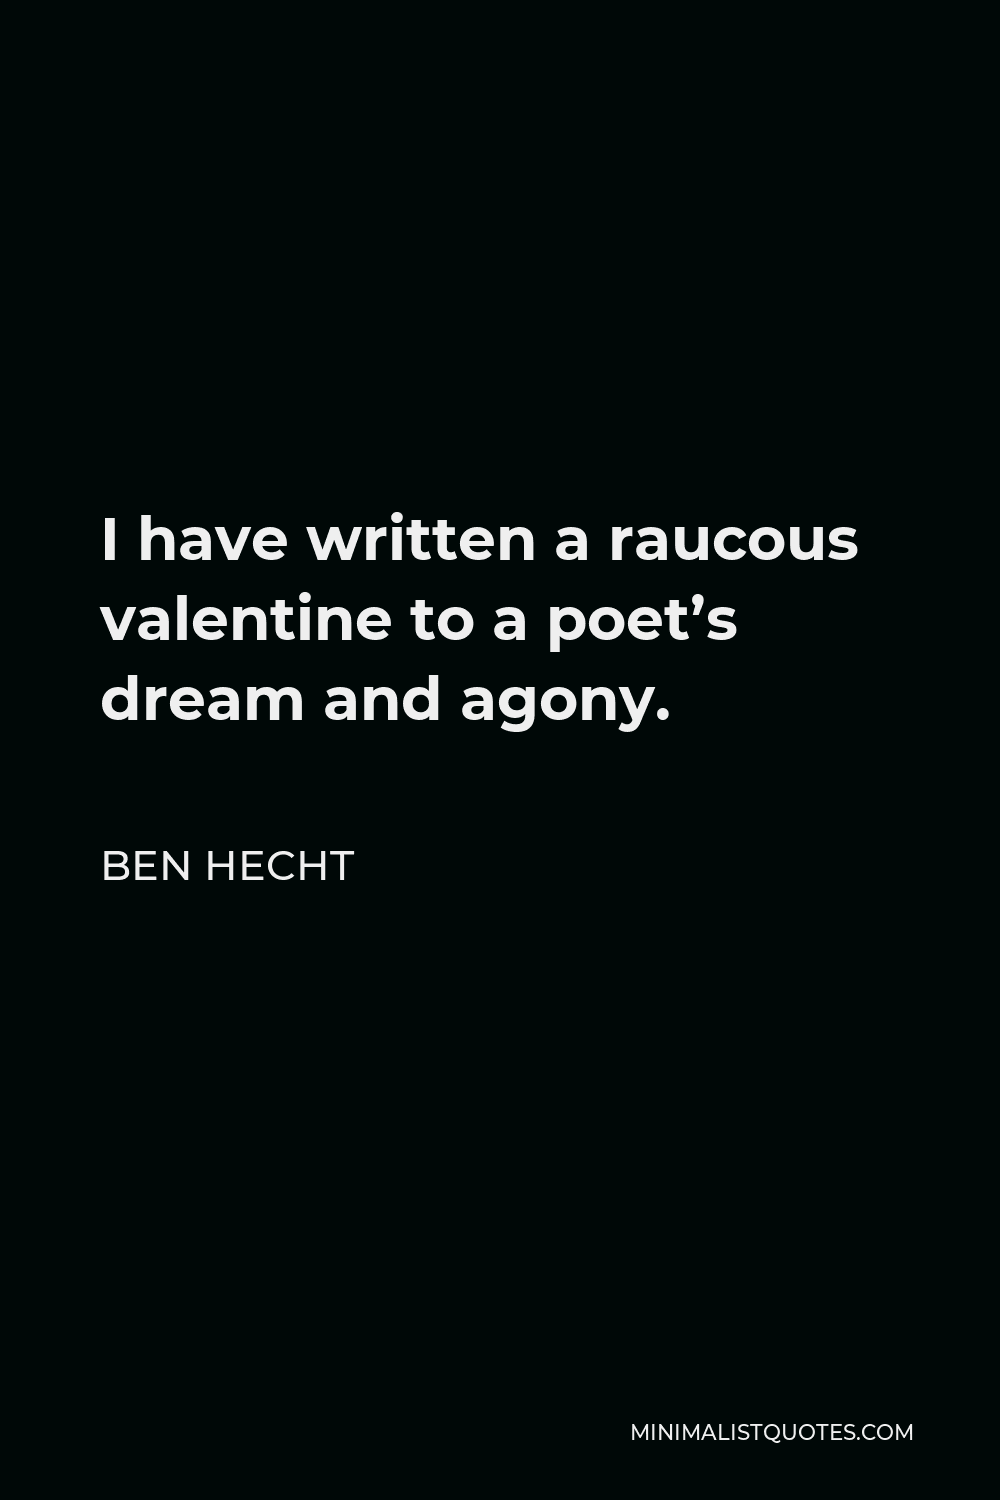 Ben Hecht Quote - I have written a raucous valentine to a poet’s dream and agony.